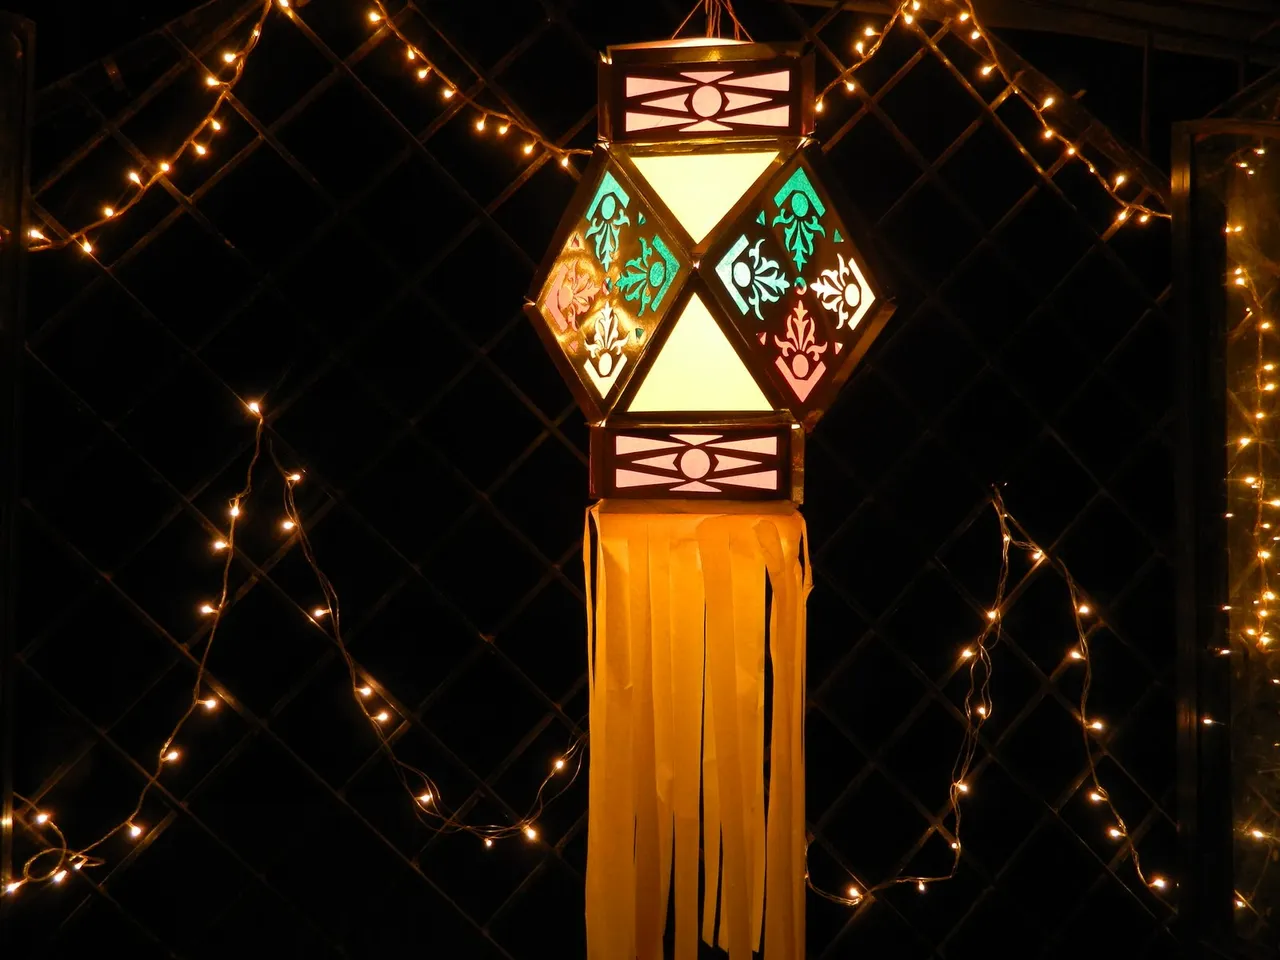 The festival of lights is here! Buy lights and lanterns online to glamorize your home!